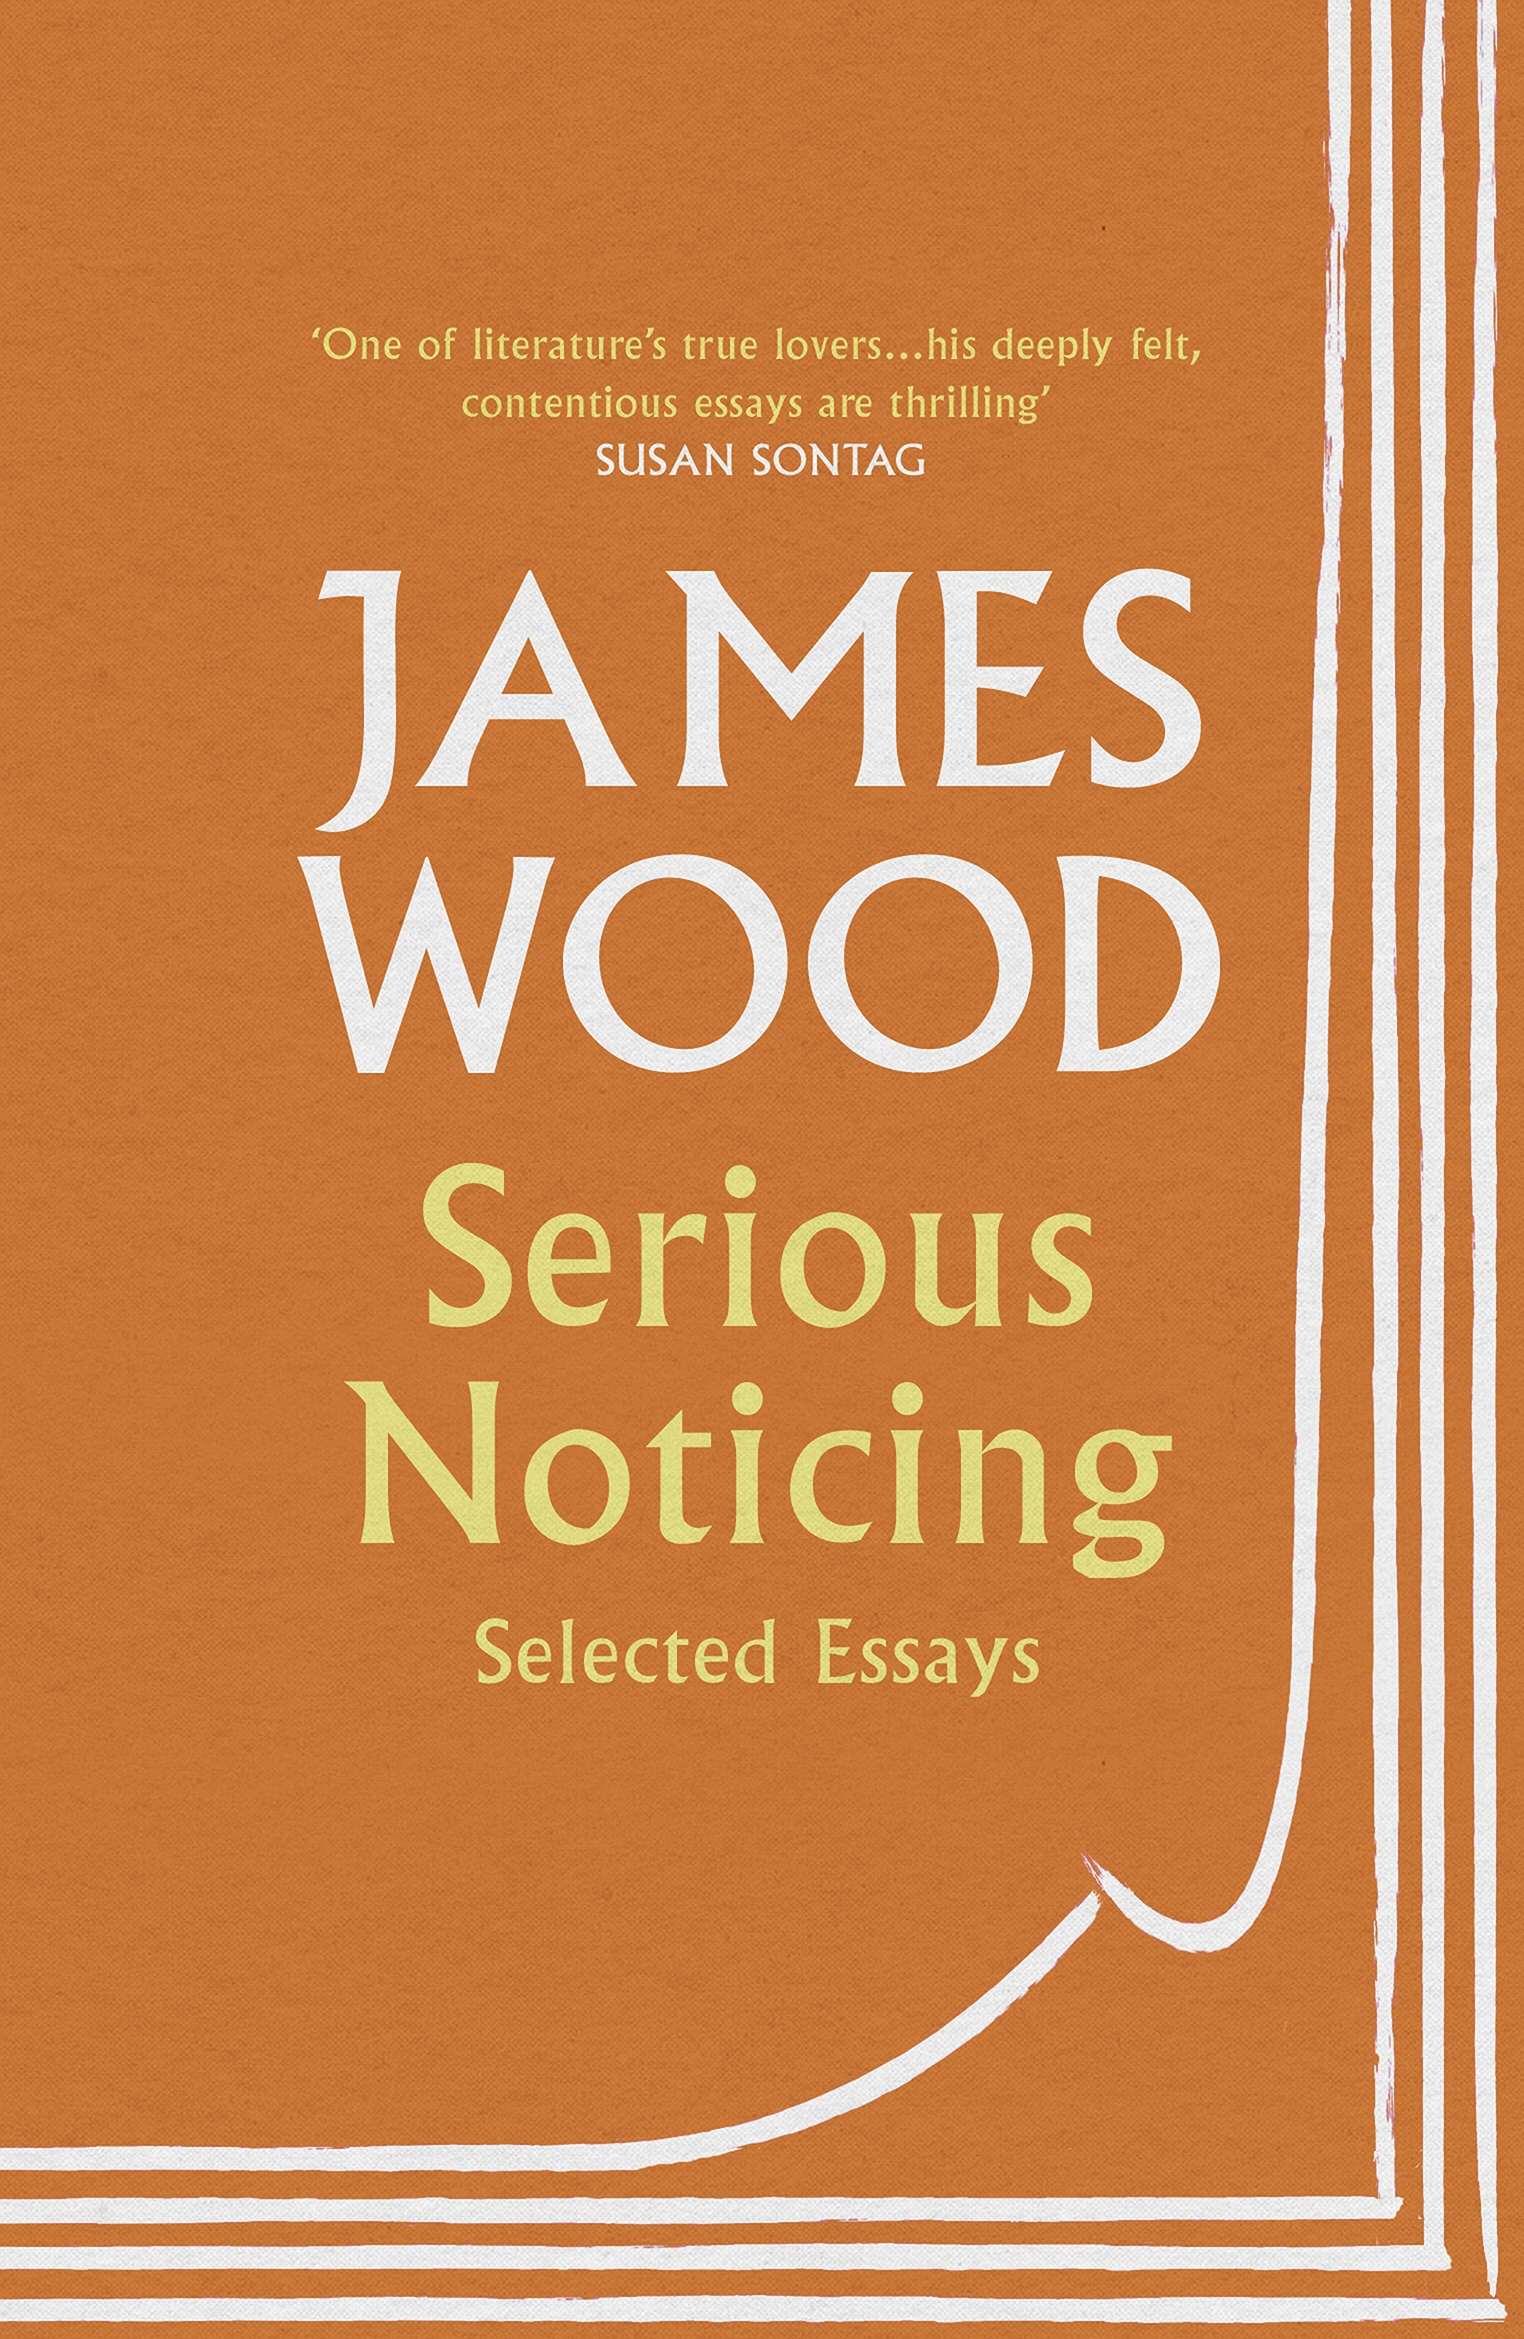 Book “Serious Noticing” by James Wood — November 7, 2019